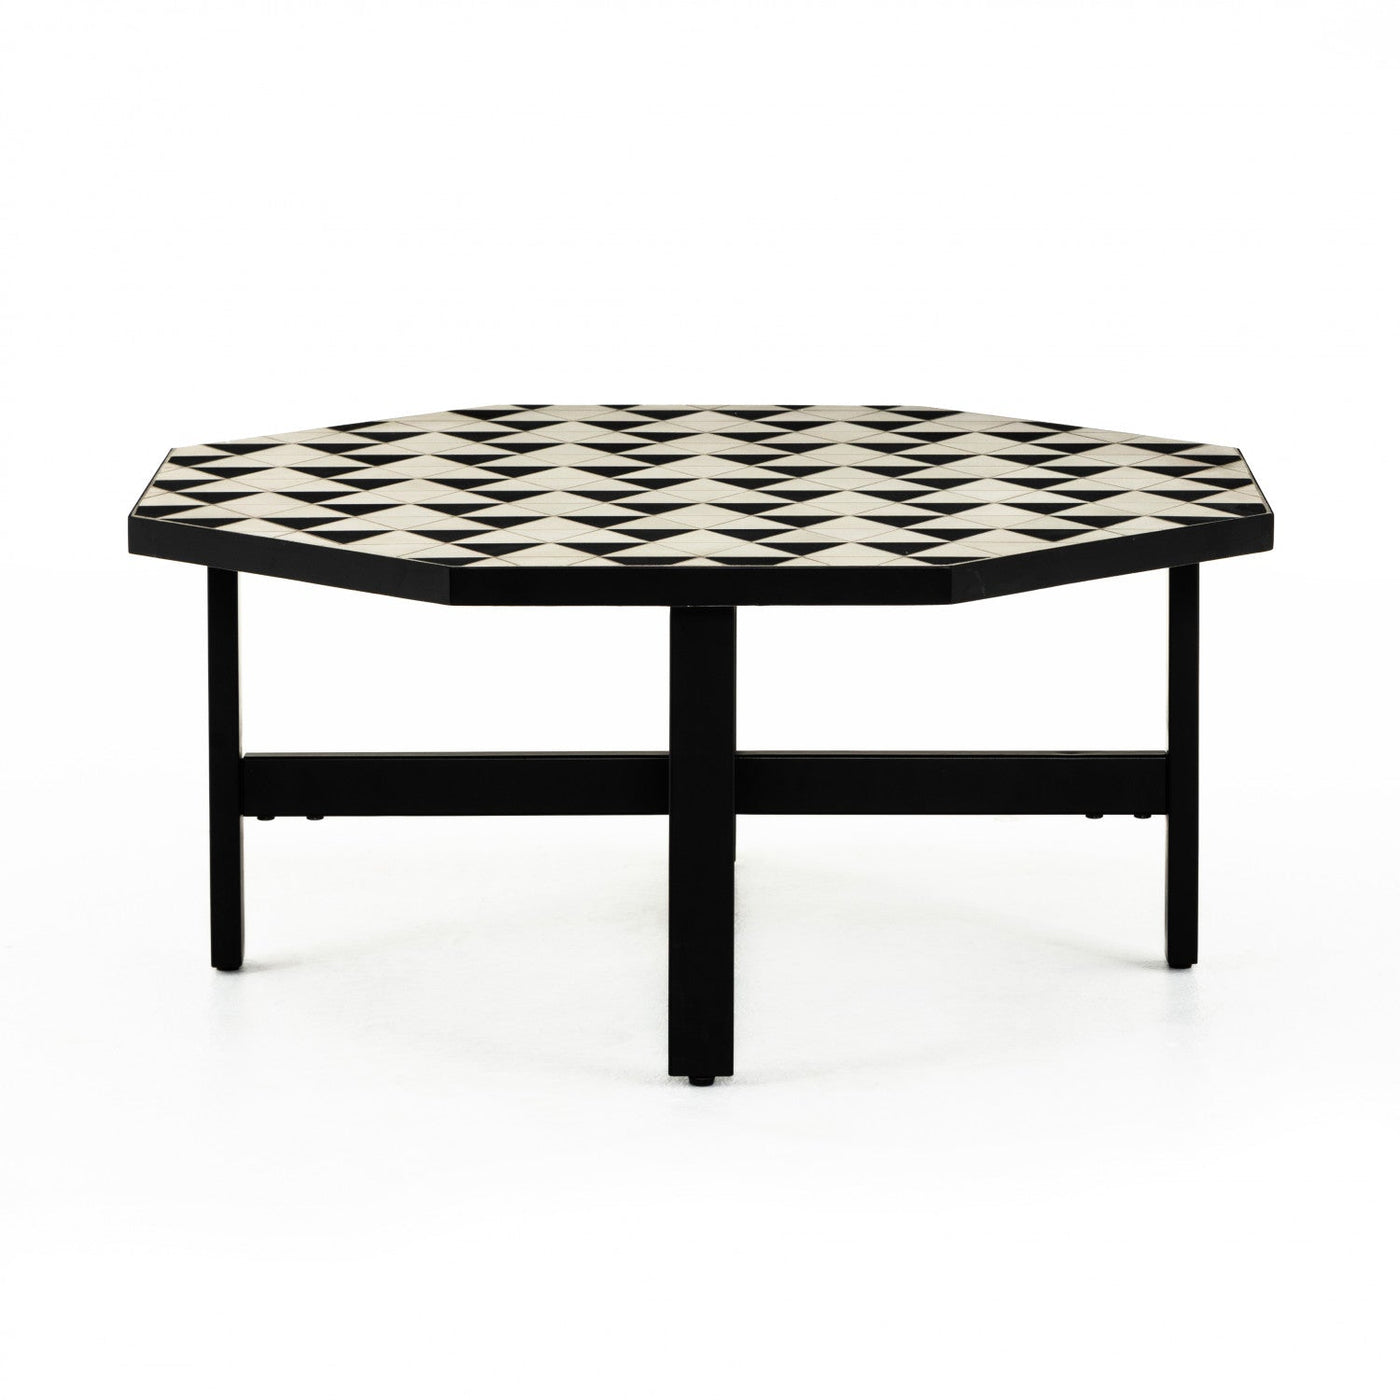 TROY OUTDOOR COFFEE TABLE